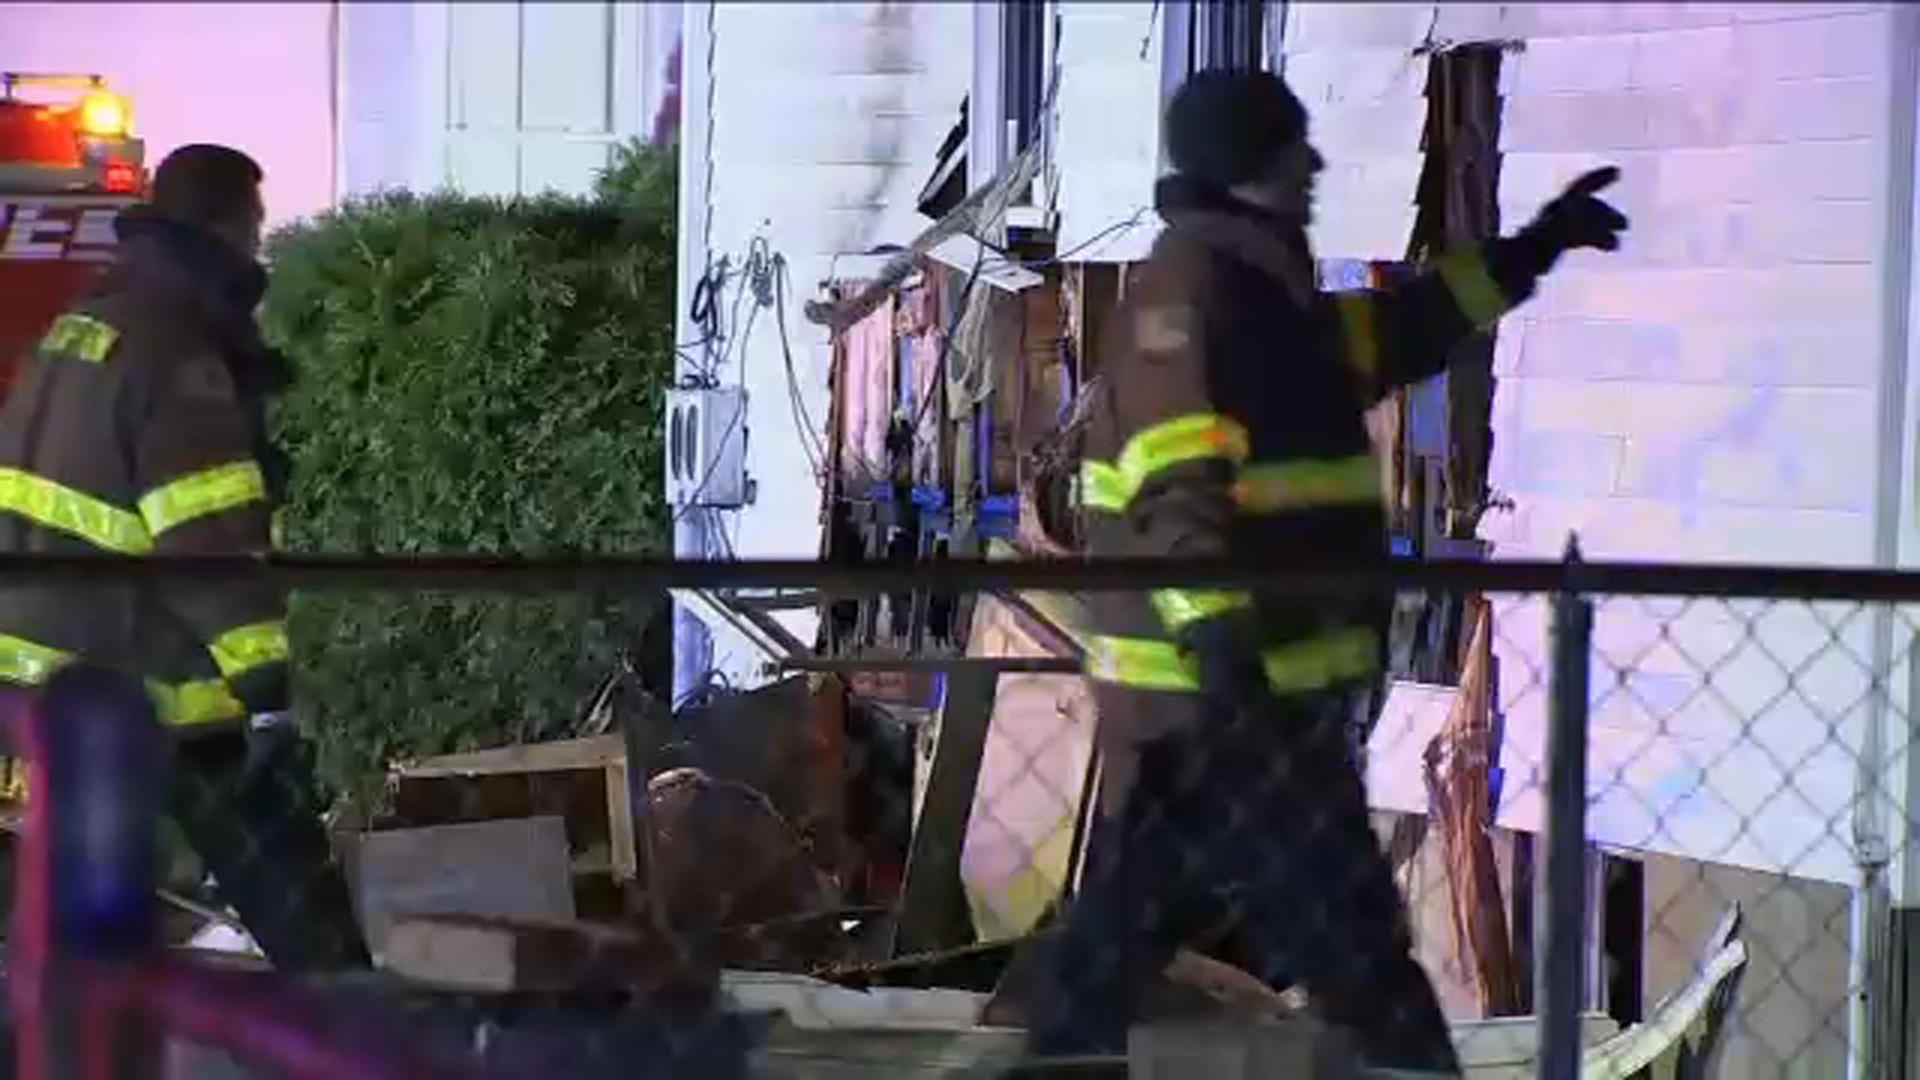 3 people killed, several injured in Passaic County house fire